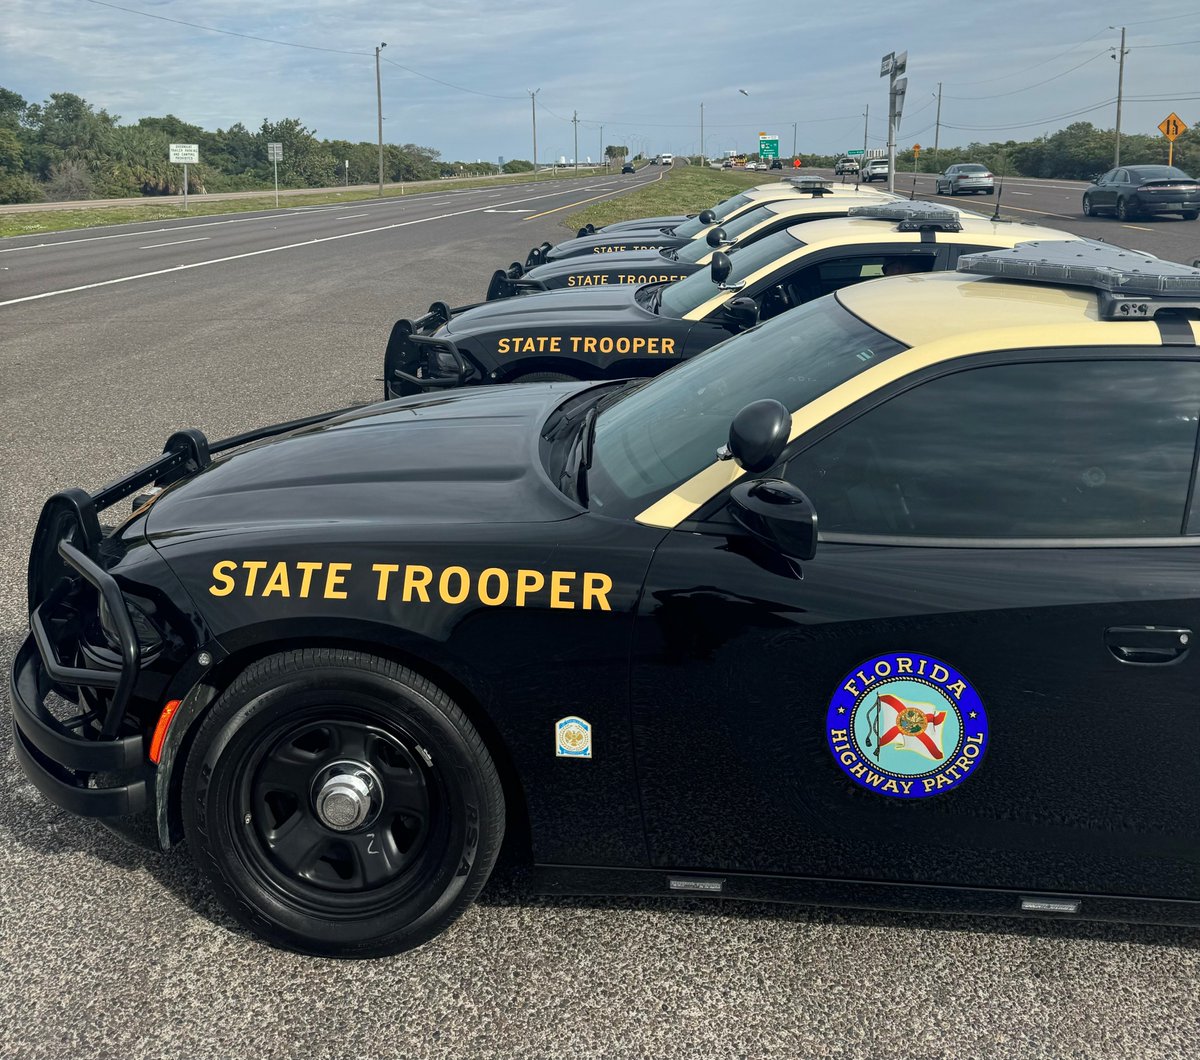 Slowing people down, one stop at a time - our roads are not racetracks!

#safety #fhp #highwaypatrol #statetrooper #speedlimit #buckleup #florida #tampabay #stpetersburg #slowdown #slowdownmoveover